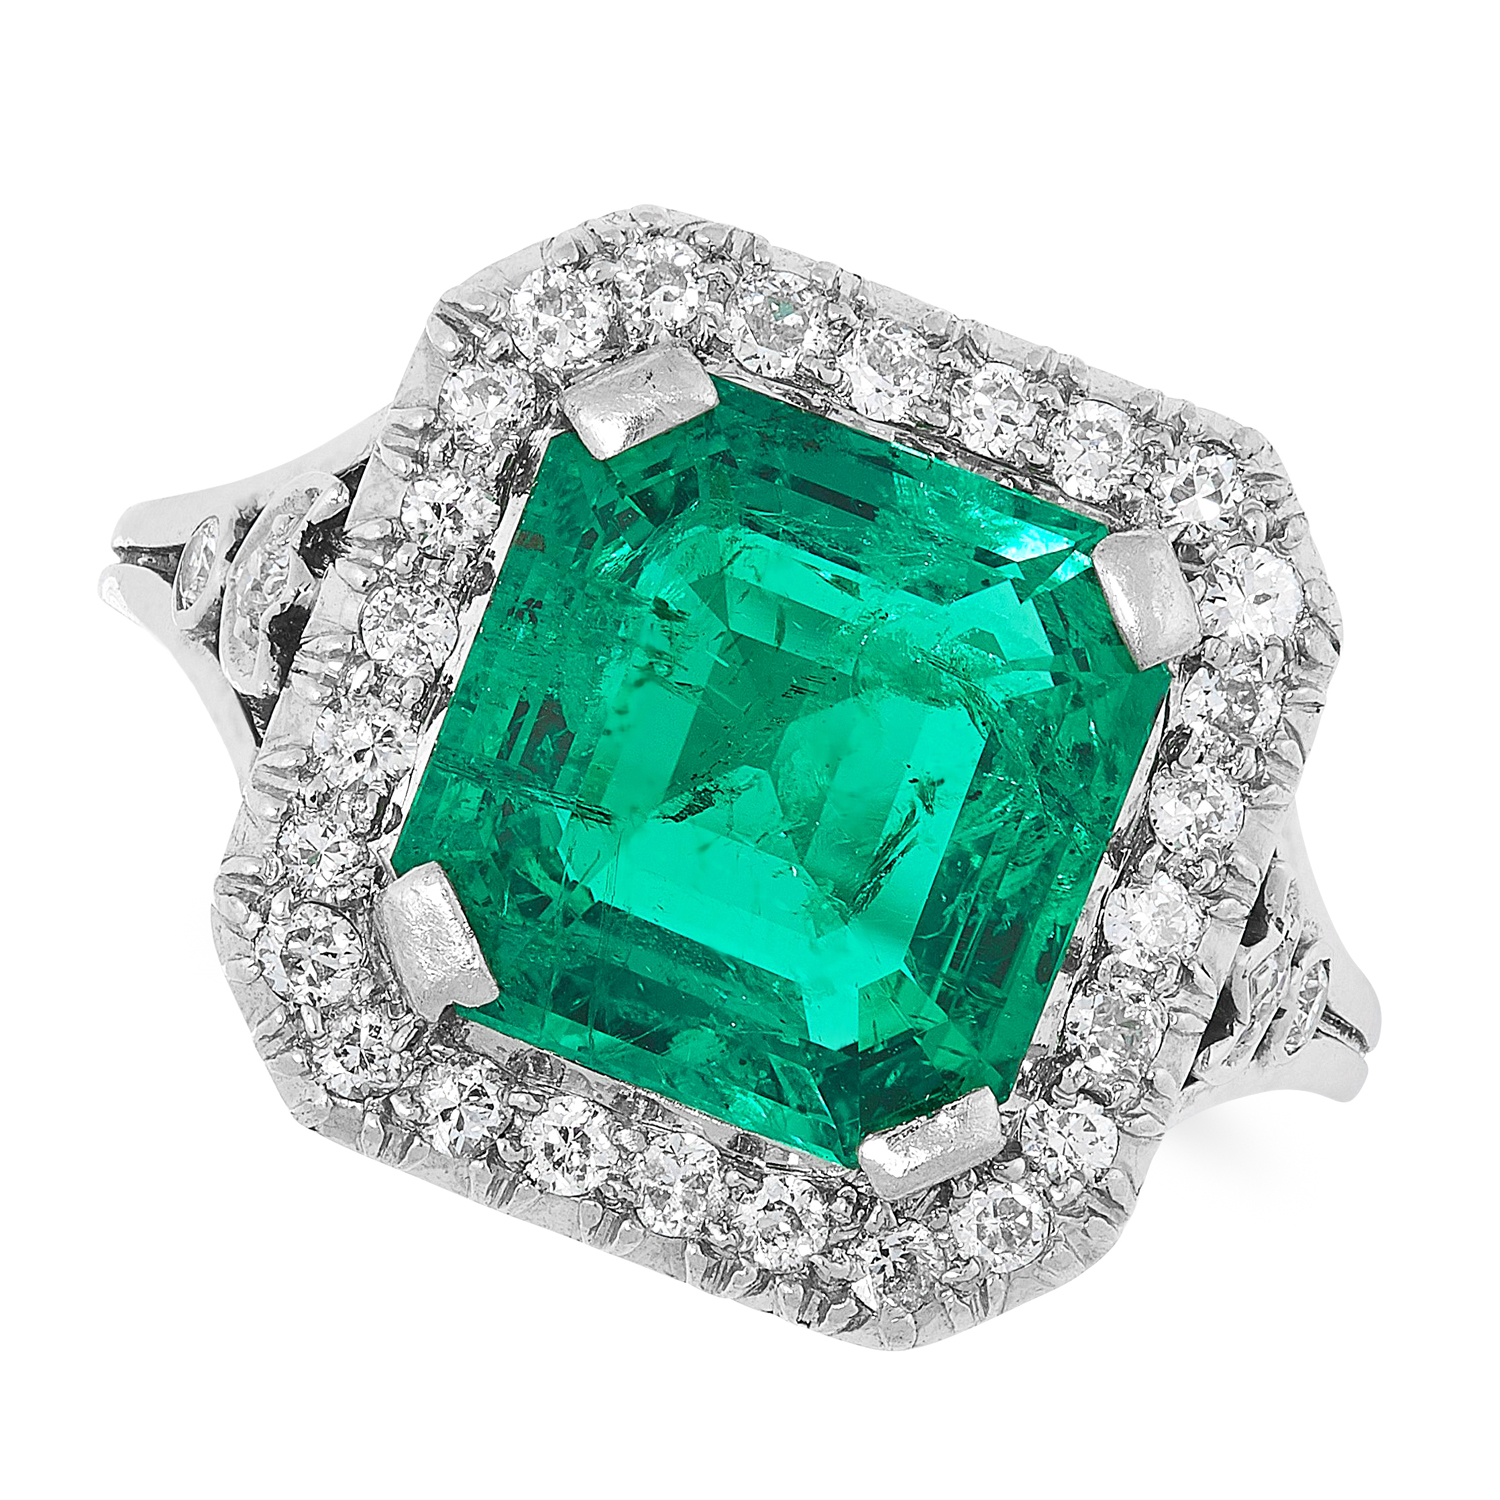 A COLOMBIAN EMERALD AND DIAMOND CLUSTER RING set with an emerald cut emerald of 2.84 carats in a